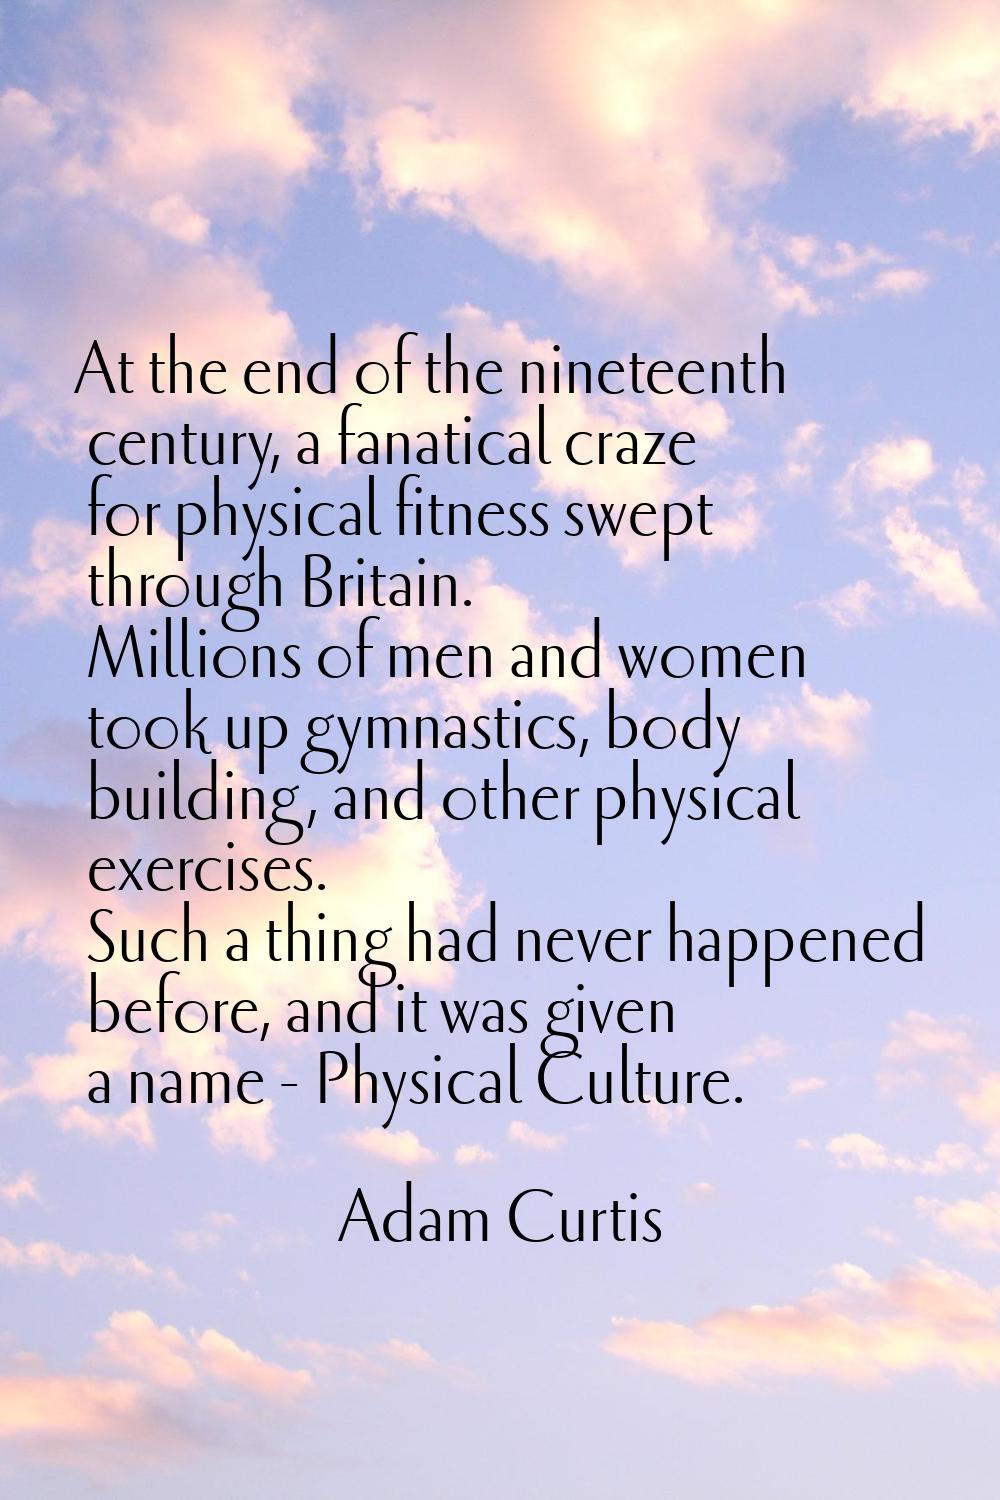 At the end of the nineteenth century, a fanatical craze for physical fitness swept through Britain.